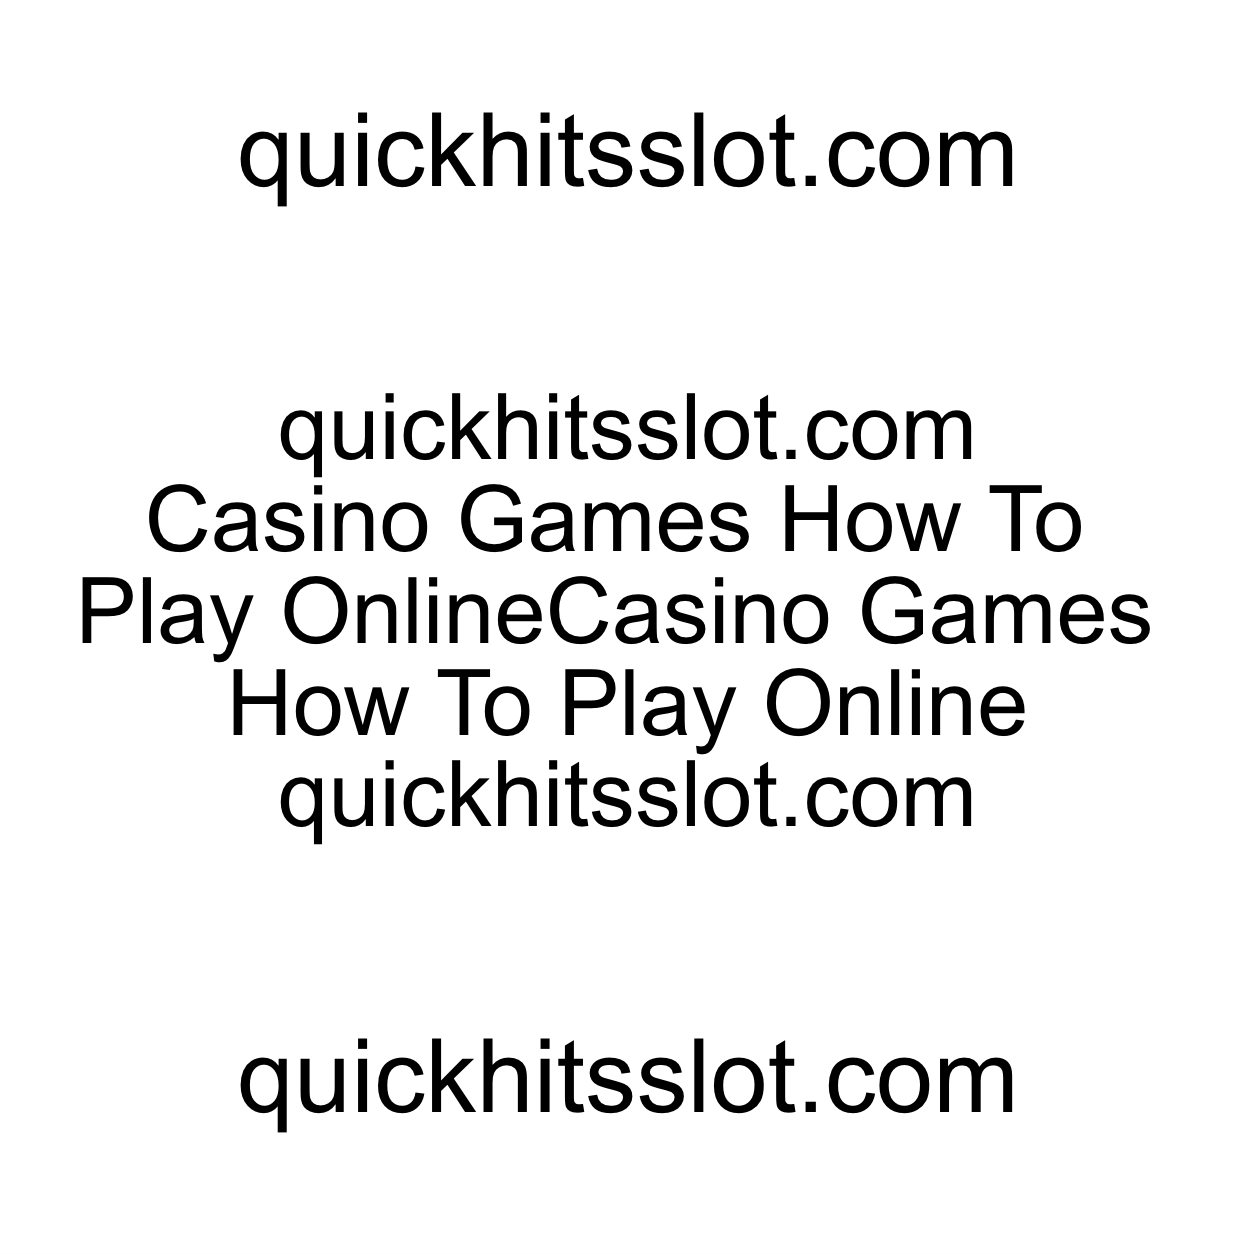 Casino Games How To Play Online quickhitsslot.comCasino Games How To Play Online quickhitsslot.com